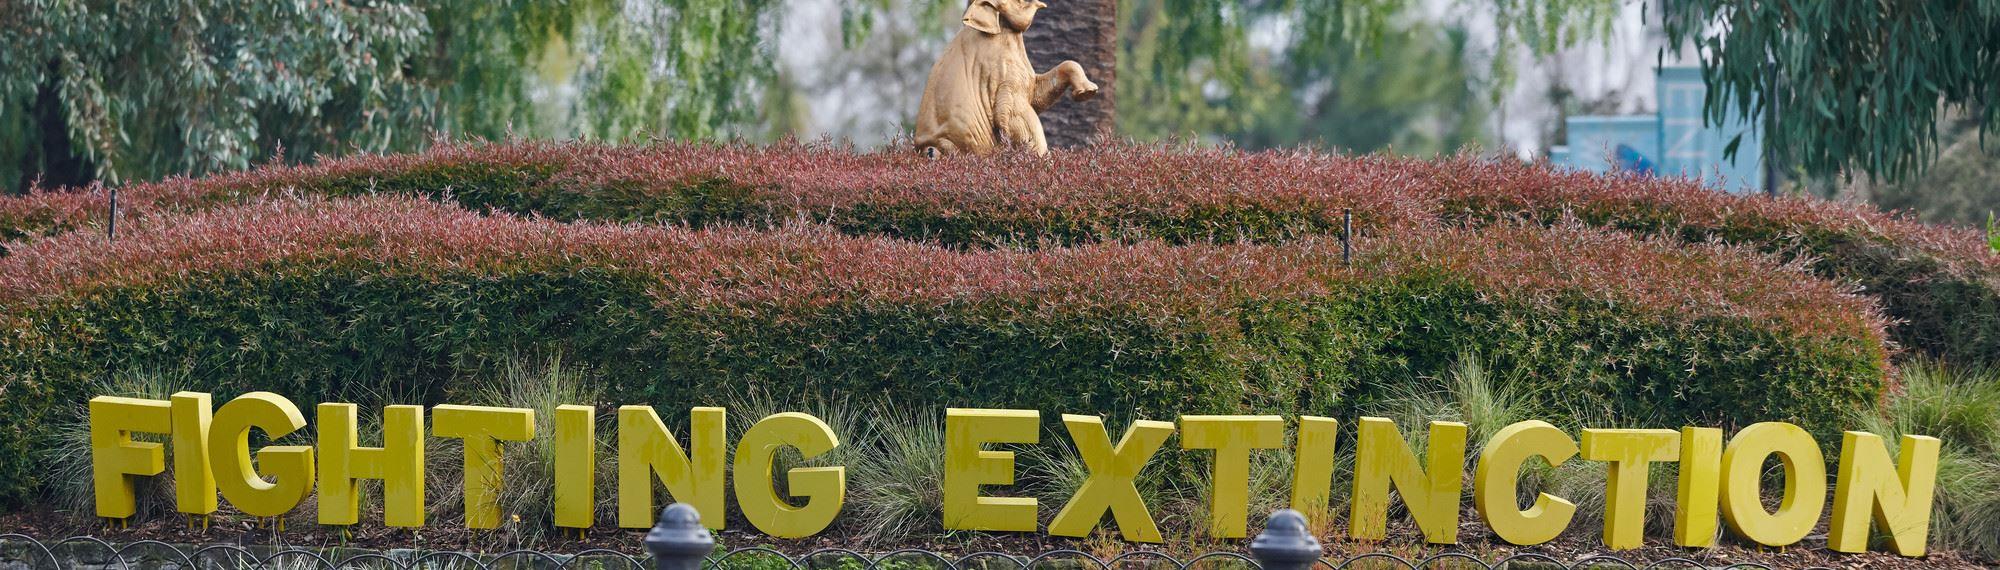 Sign saying Fighting Extinction with small hedge and golden elephant statue behind.